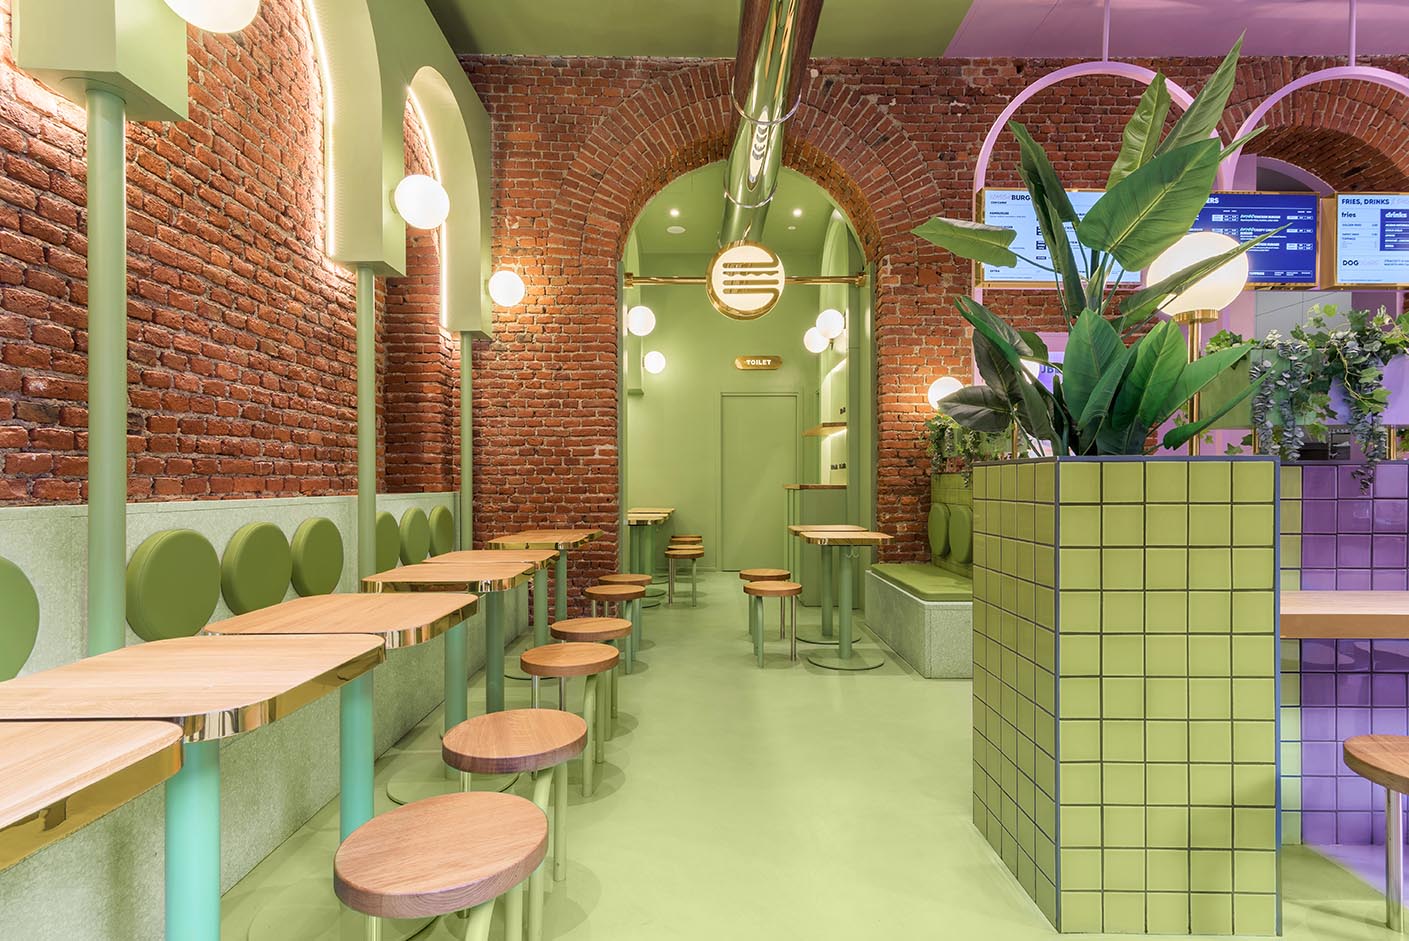 A new restaurant uses a colorful green and purple interior to draw people inside.